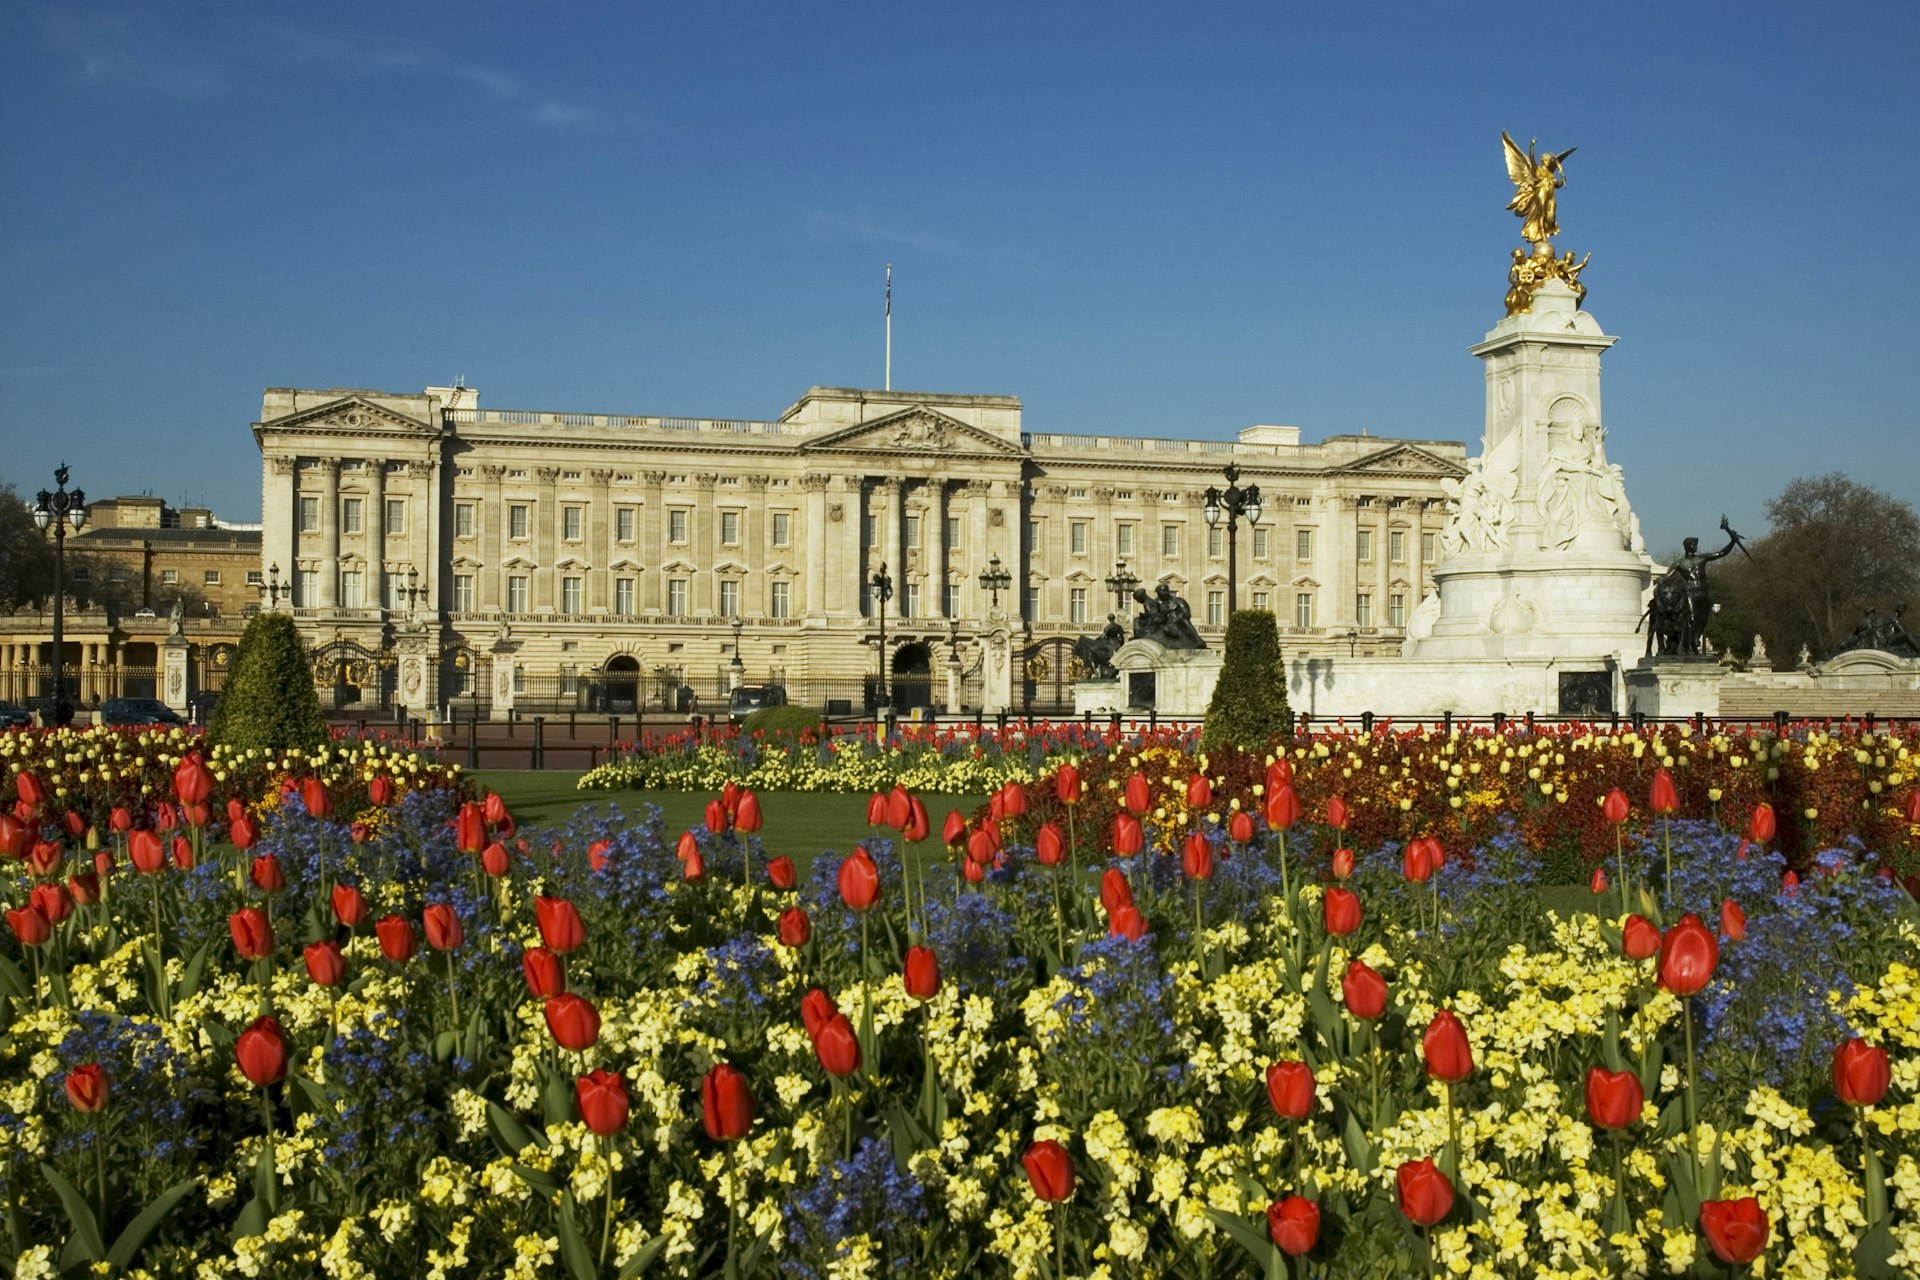 Spring flowers such as tulips in front of Buckingham Palace.